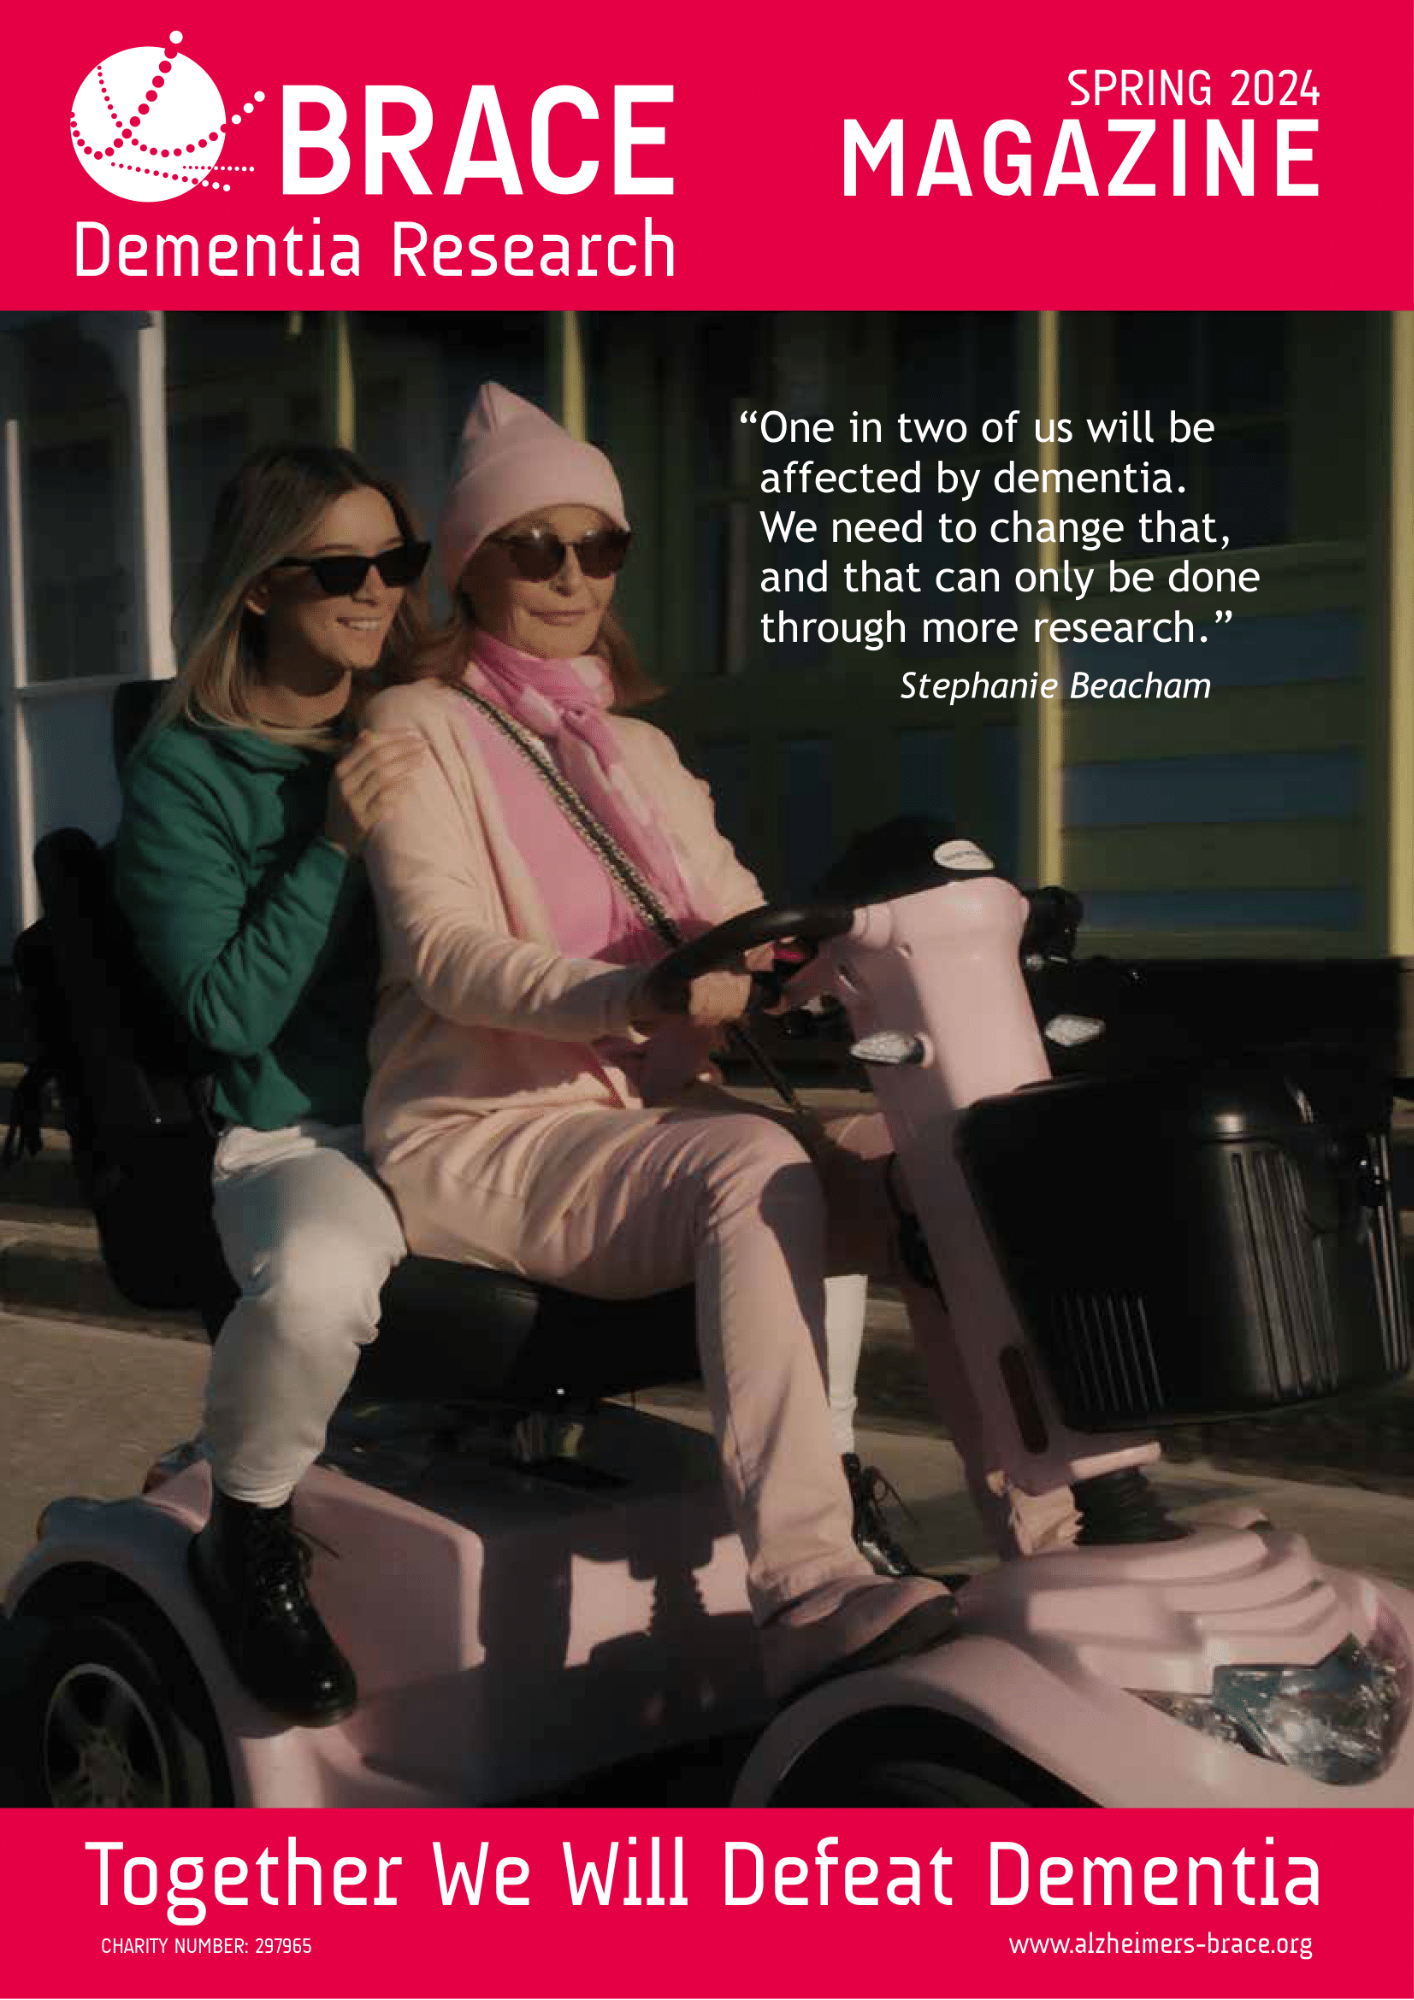 BRACE Spring magazine. A photo of Stephanie Beacham and Eloise Smyth in the film, Grey Matter, on a pink mobility scooter. "One in two of us will be affected by dementia. We need to change that, and that can only be done through more research." Stephanie Beacham,